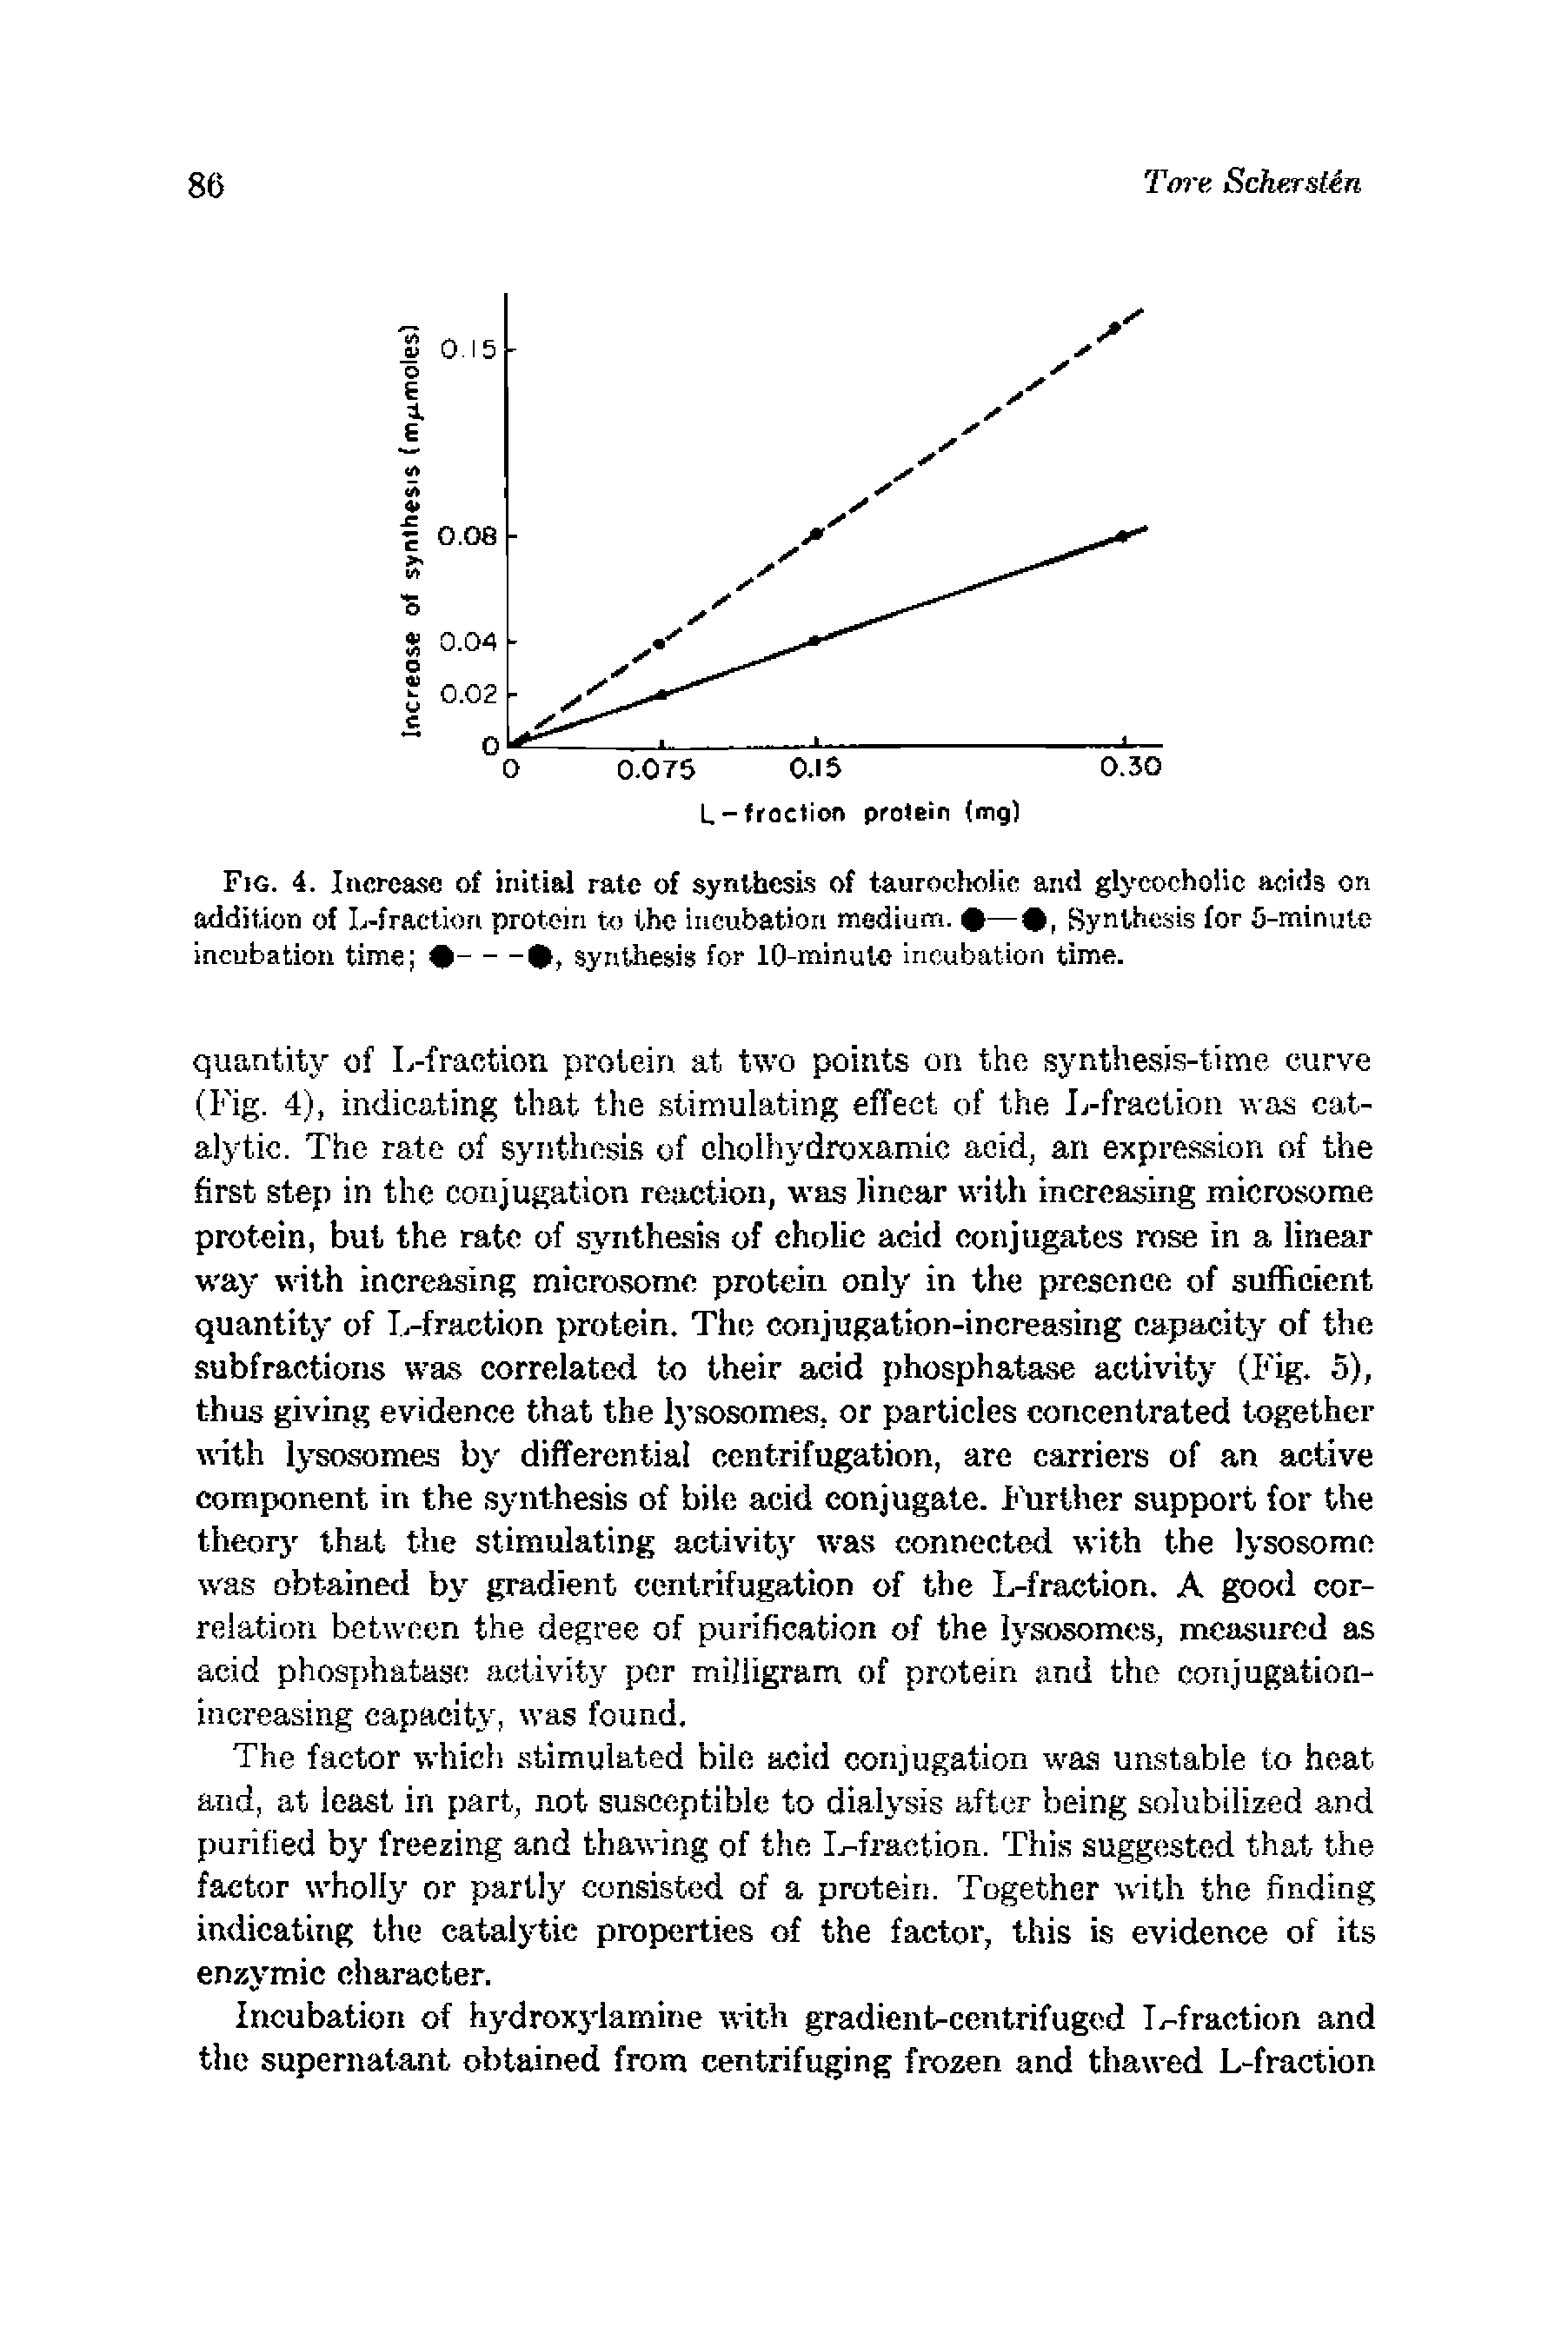 Fig. 4. Increase of initial rate of synthesis of taurochoiic ami glycocholic acids on addition of L-fraction protein to the incubation medium. — , Synthesis for C-min jtc incubation time ------synthesis for 10-minuto inoubation time.